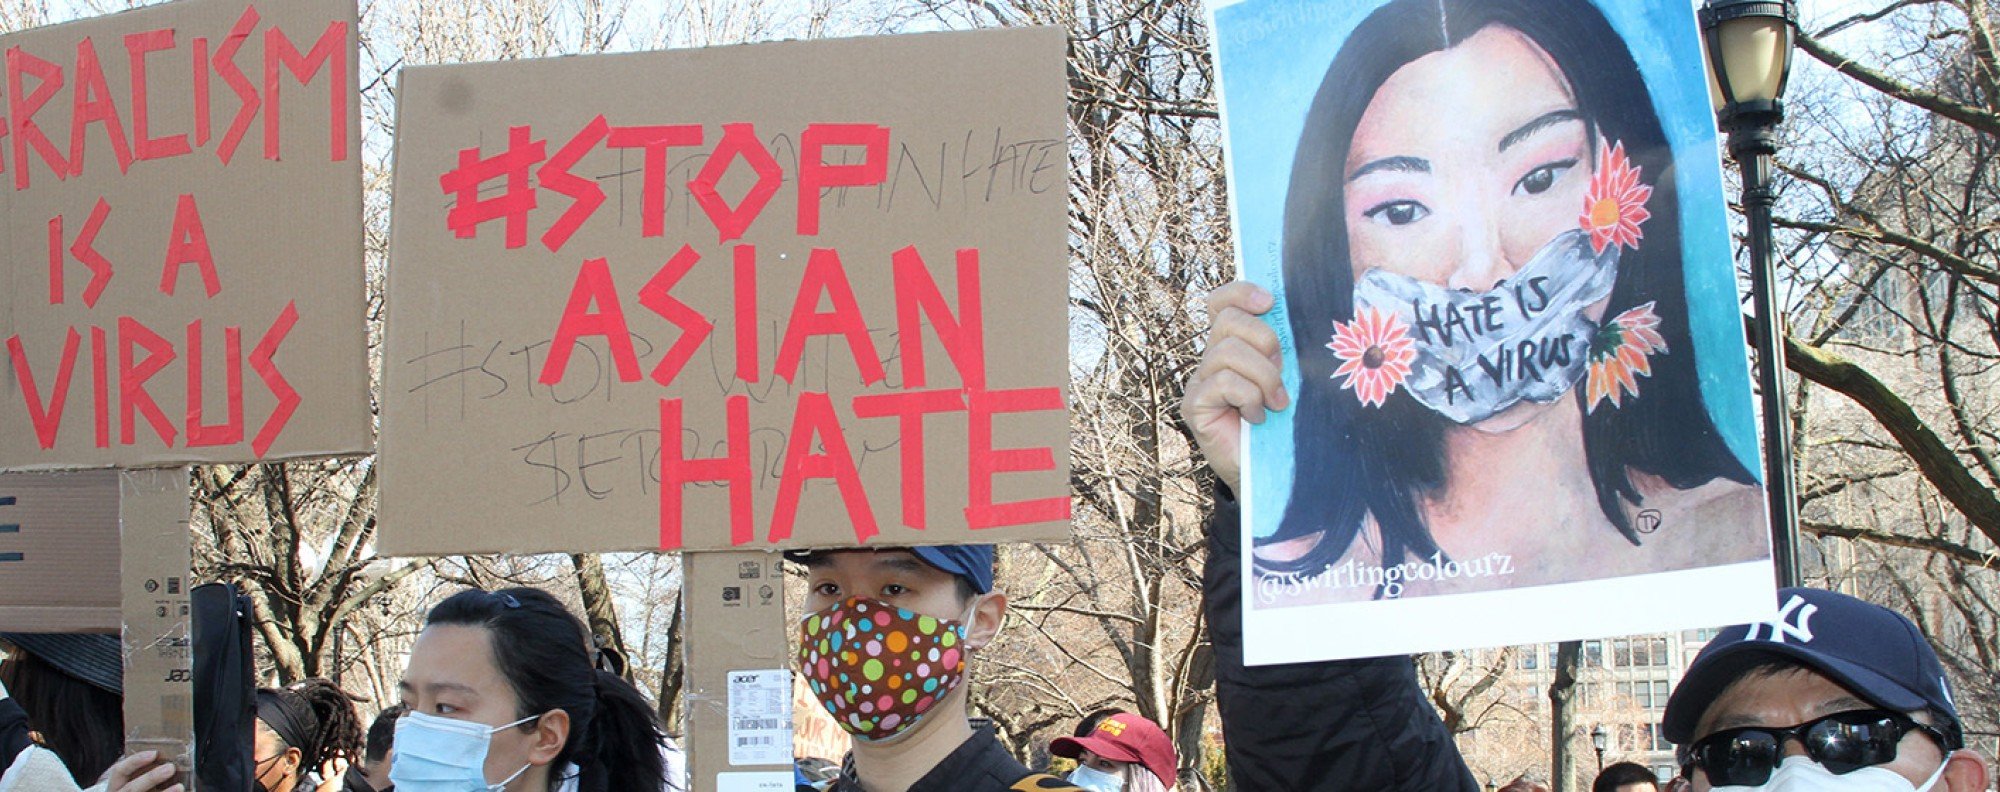 Anti-Asian racism demonstration in New York. Photo: DPA